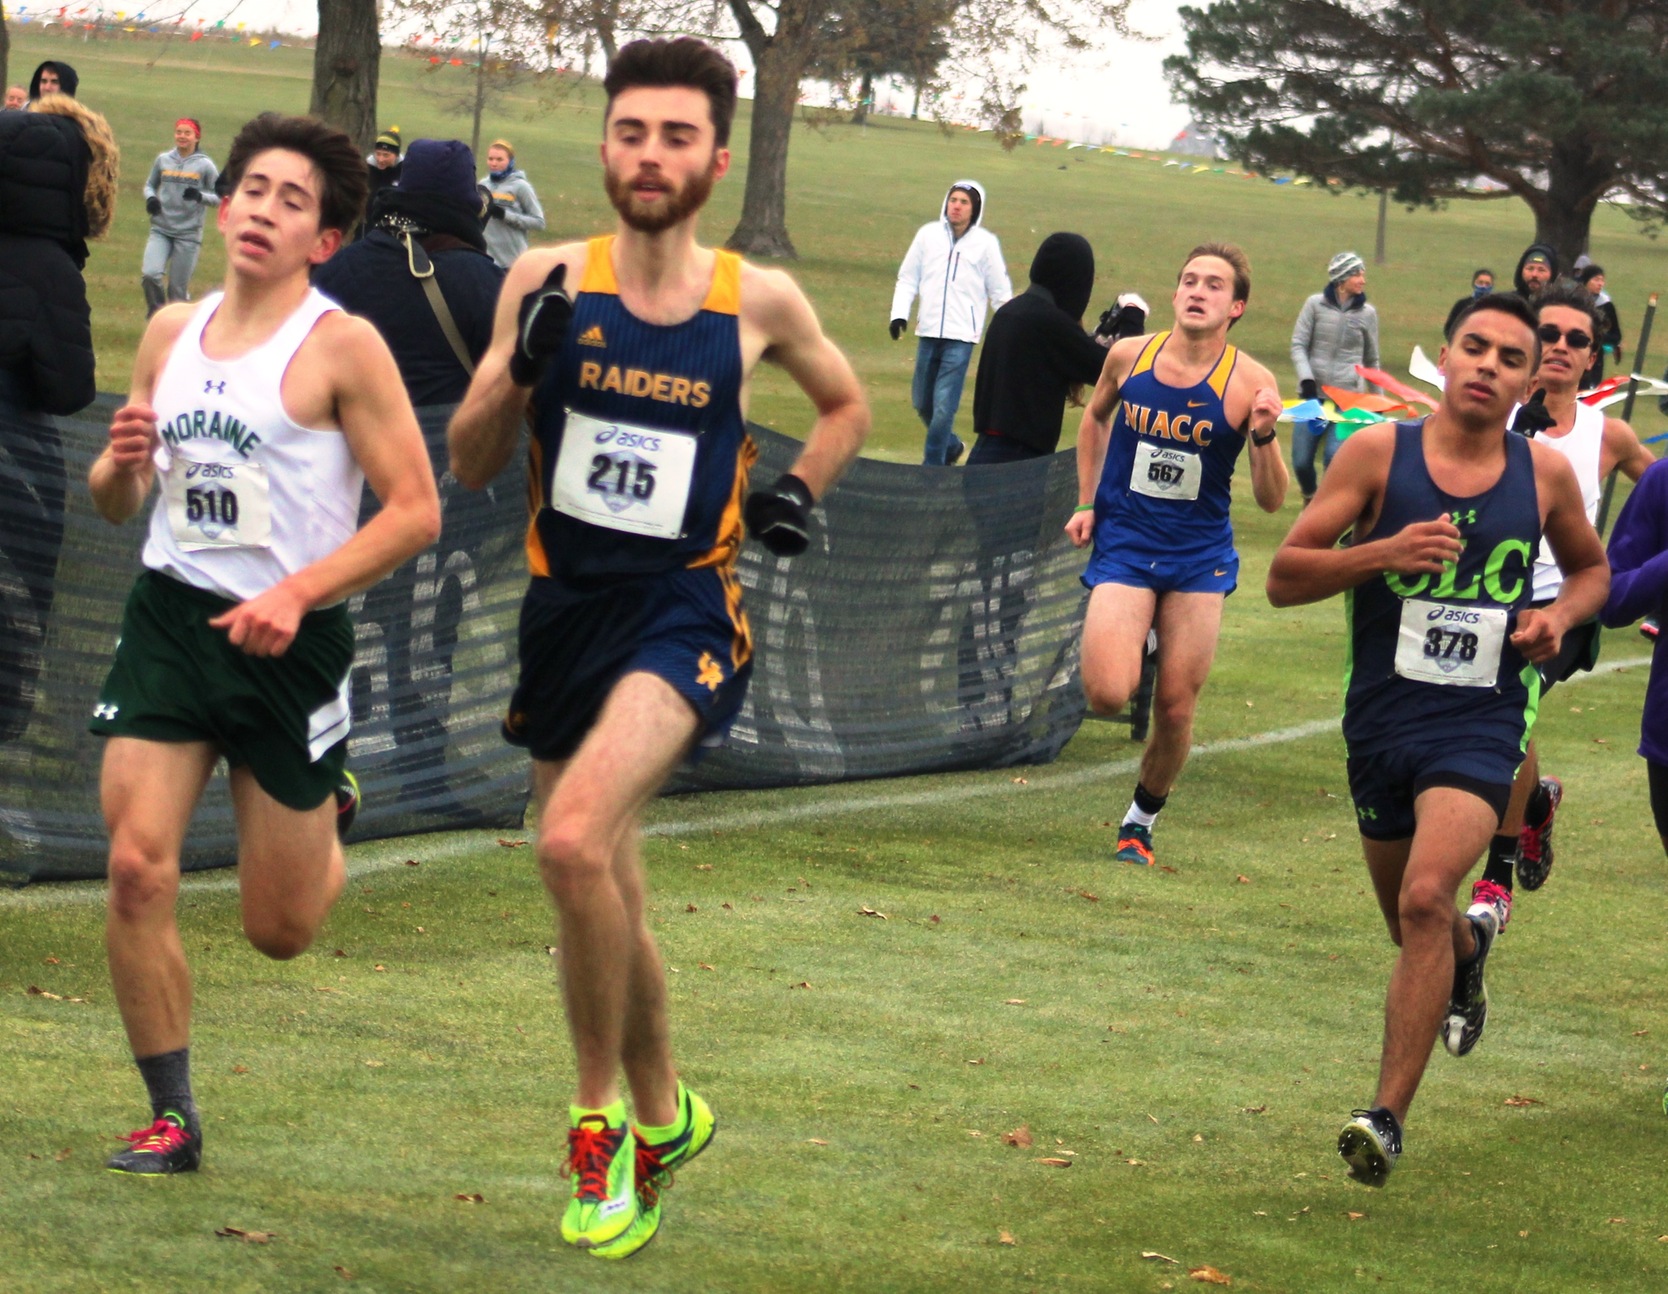 NIACC's Daniel Hennigar sprints to the finish line at last season's national meet.